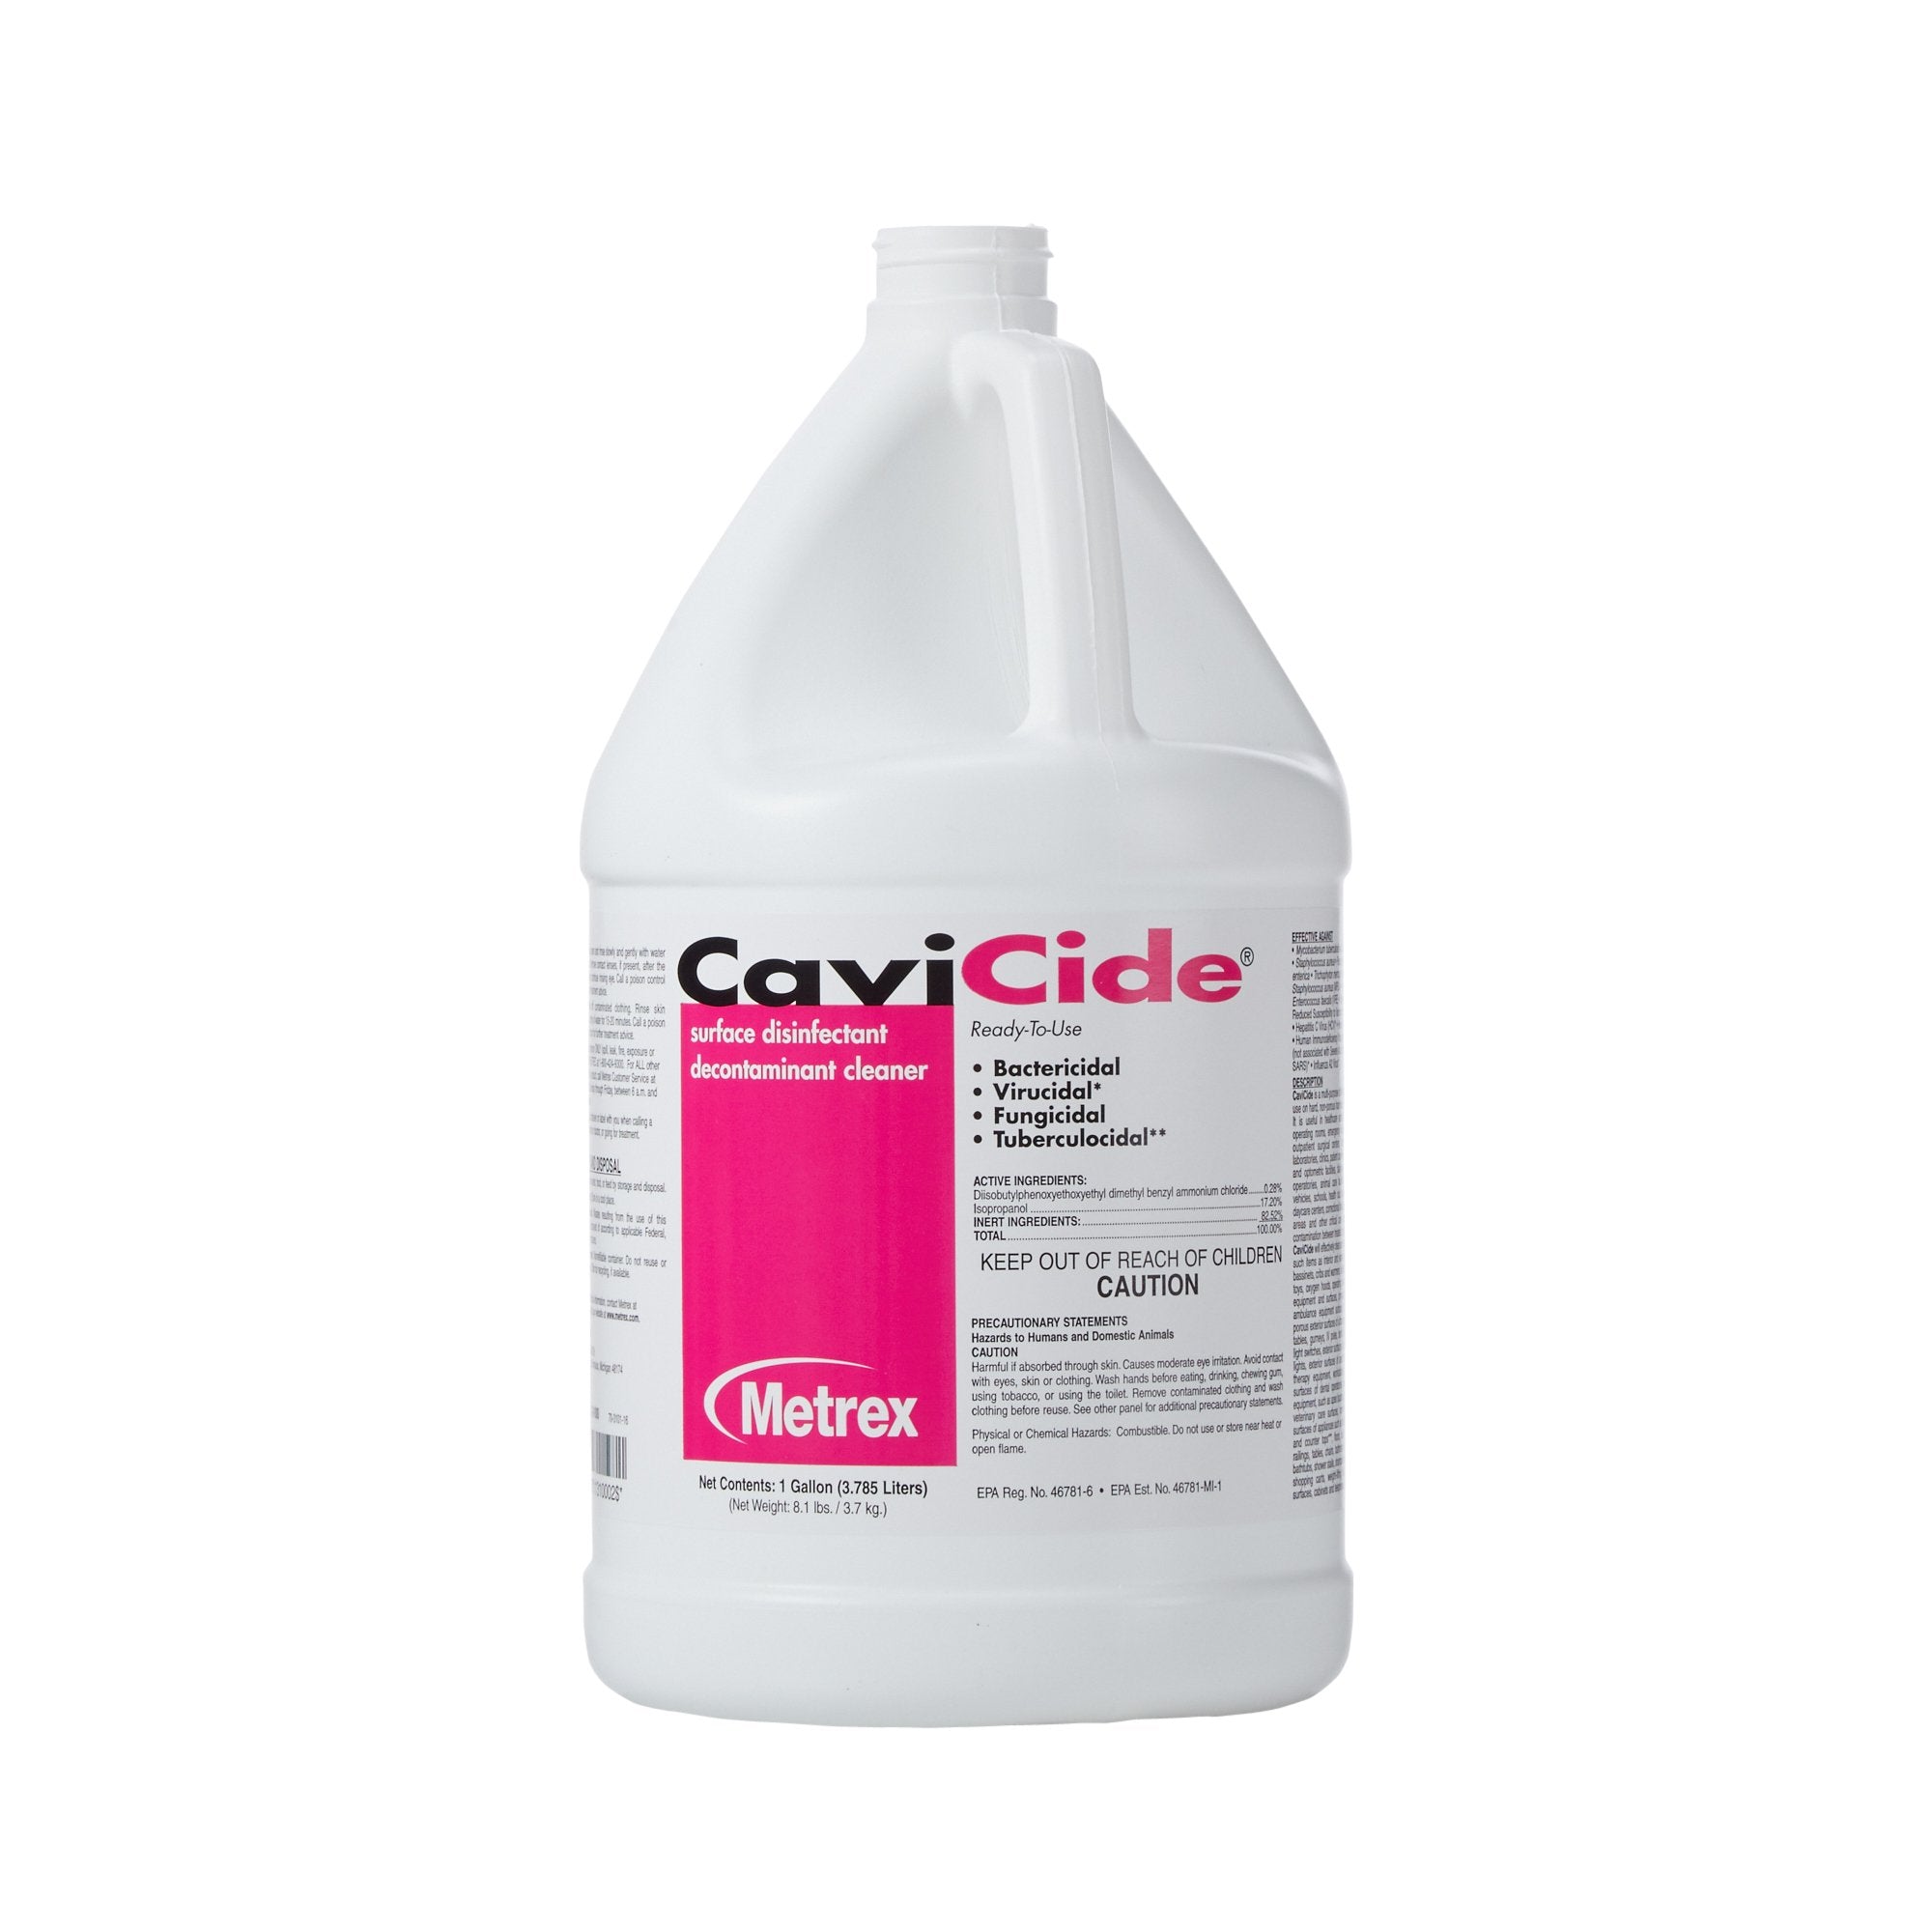 CaviCide™ Surface Disinfectant Cleaner Alcohol Based Manual Pour Liquid 1 gal. Jug Alcohol Scent NonSterile